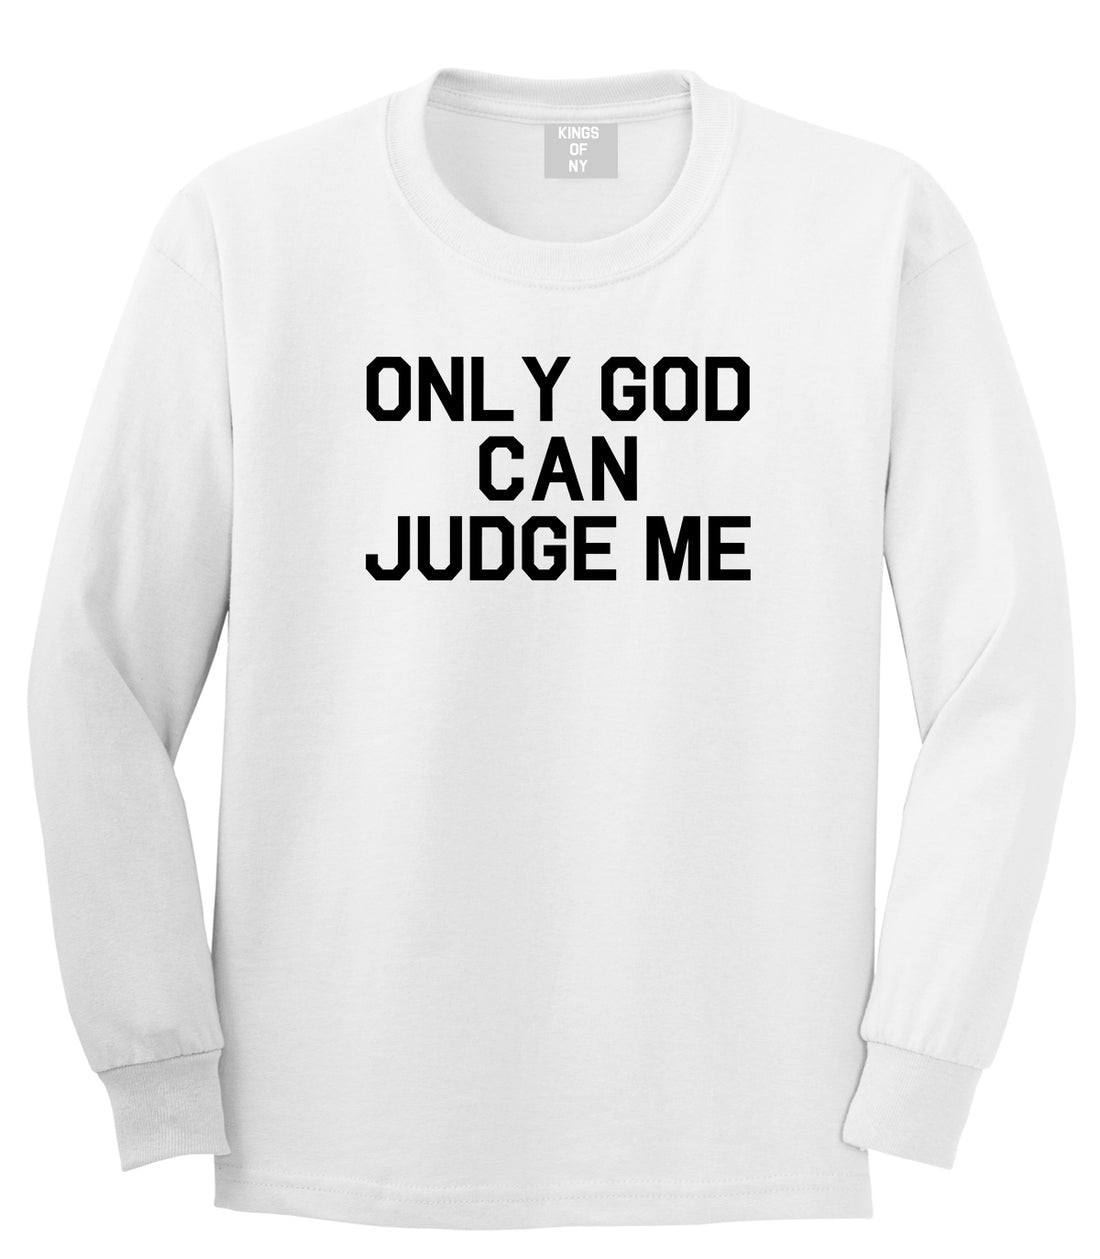 Only God Can Judge Me Mens Long Sleeve T-Shirt White by Kings Of NY